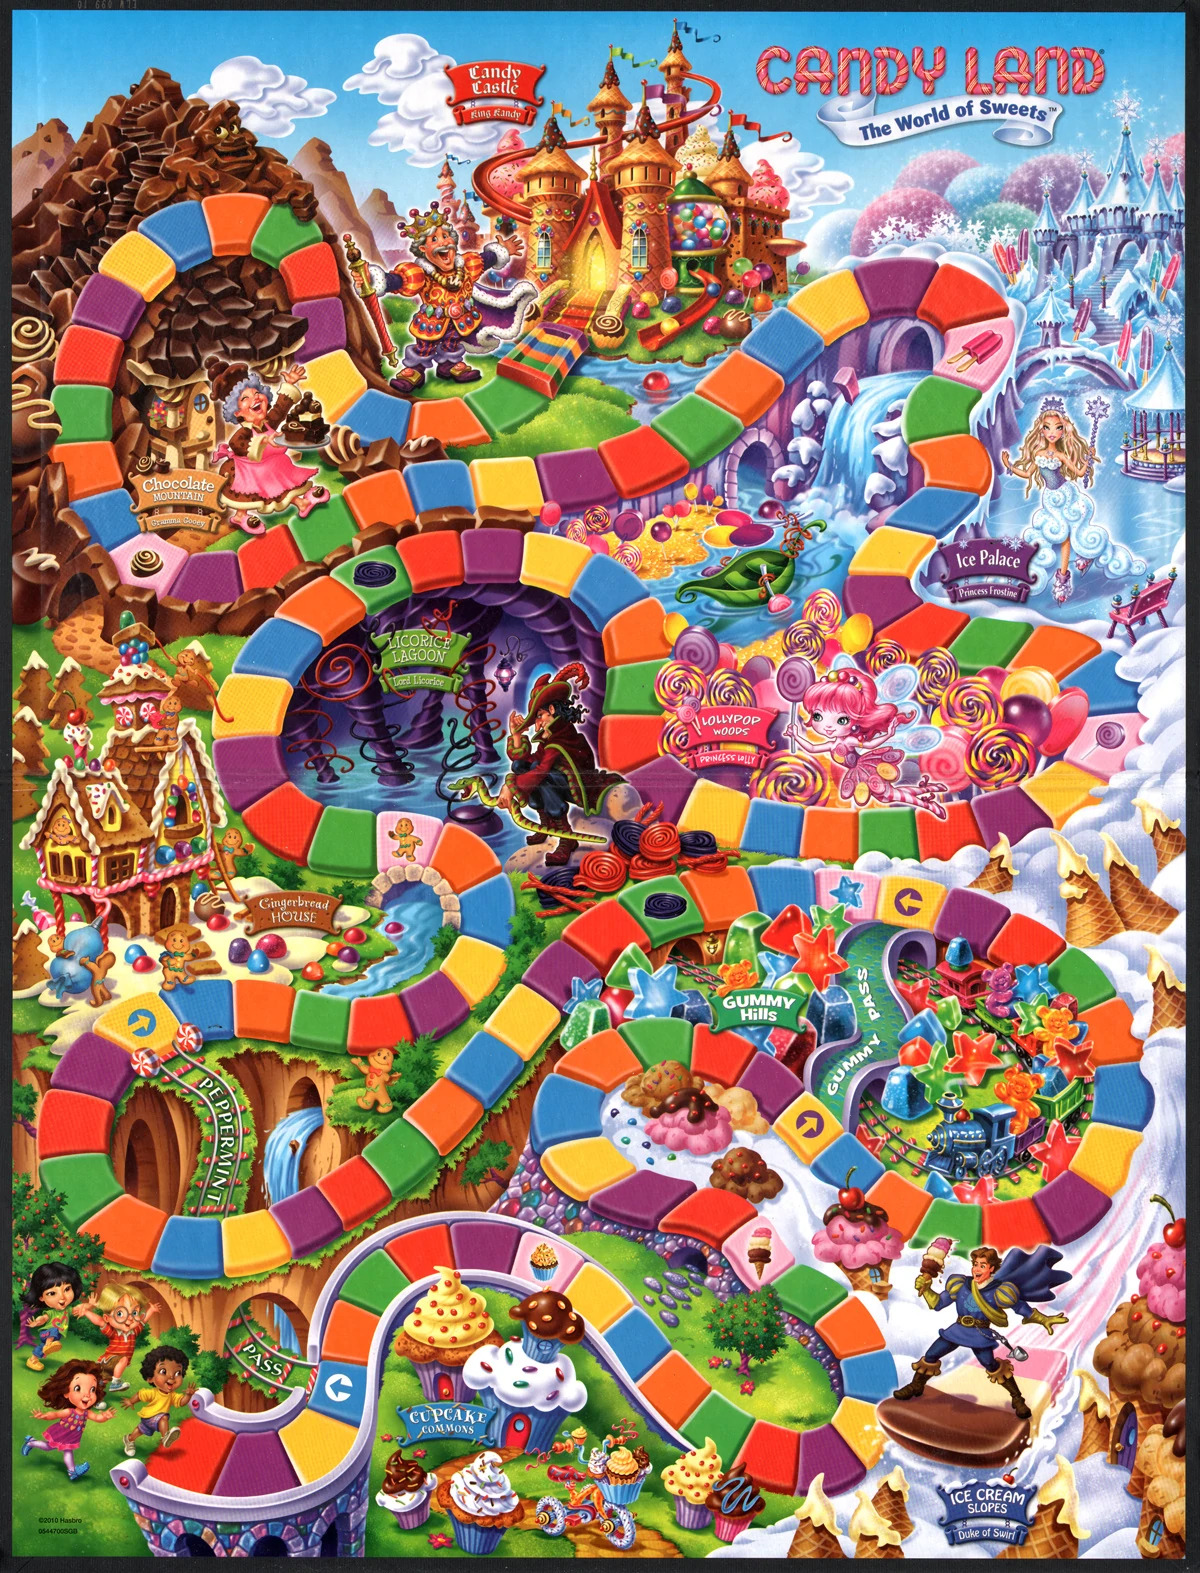 Printable Candyland Board Game Example_96187